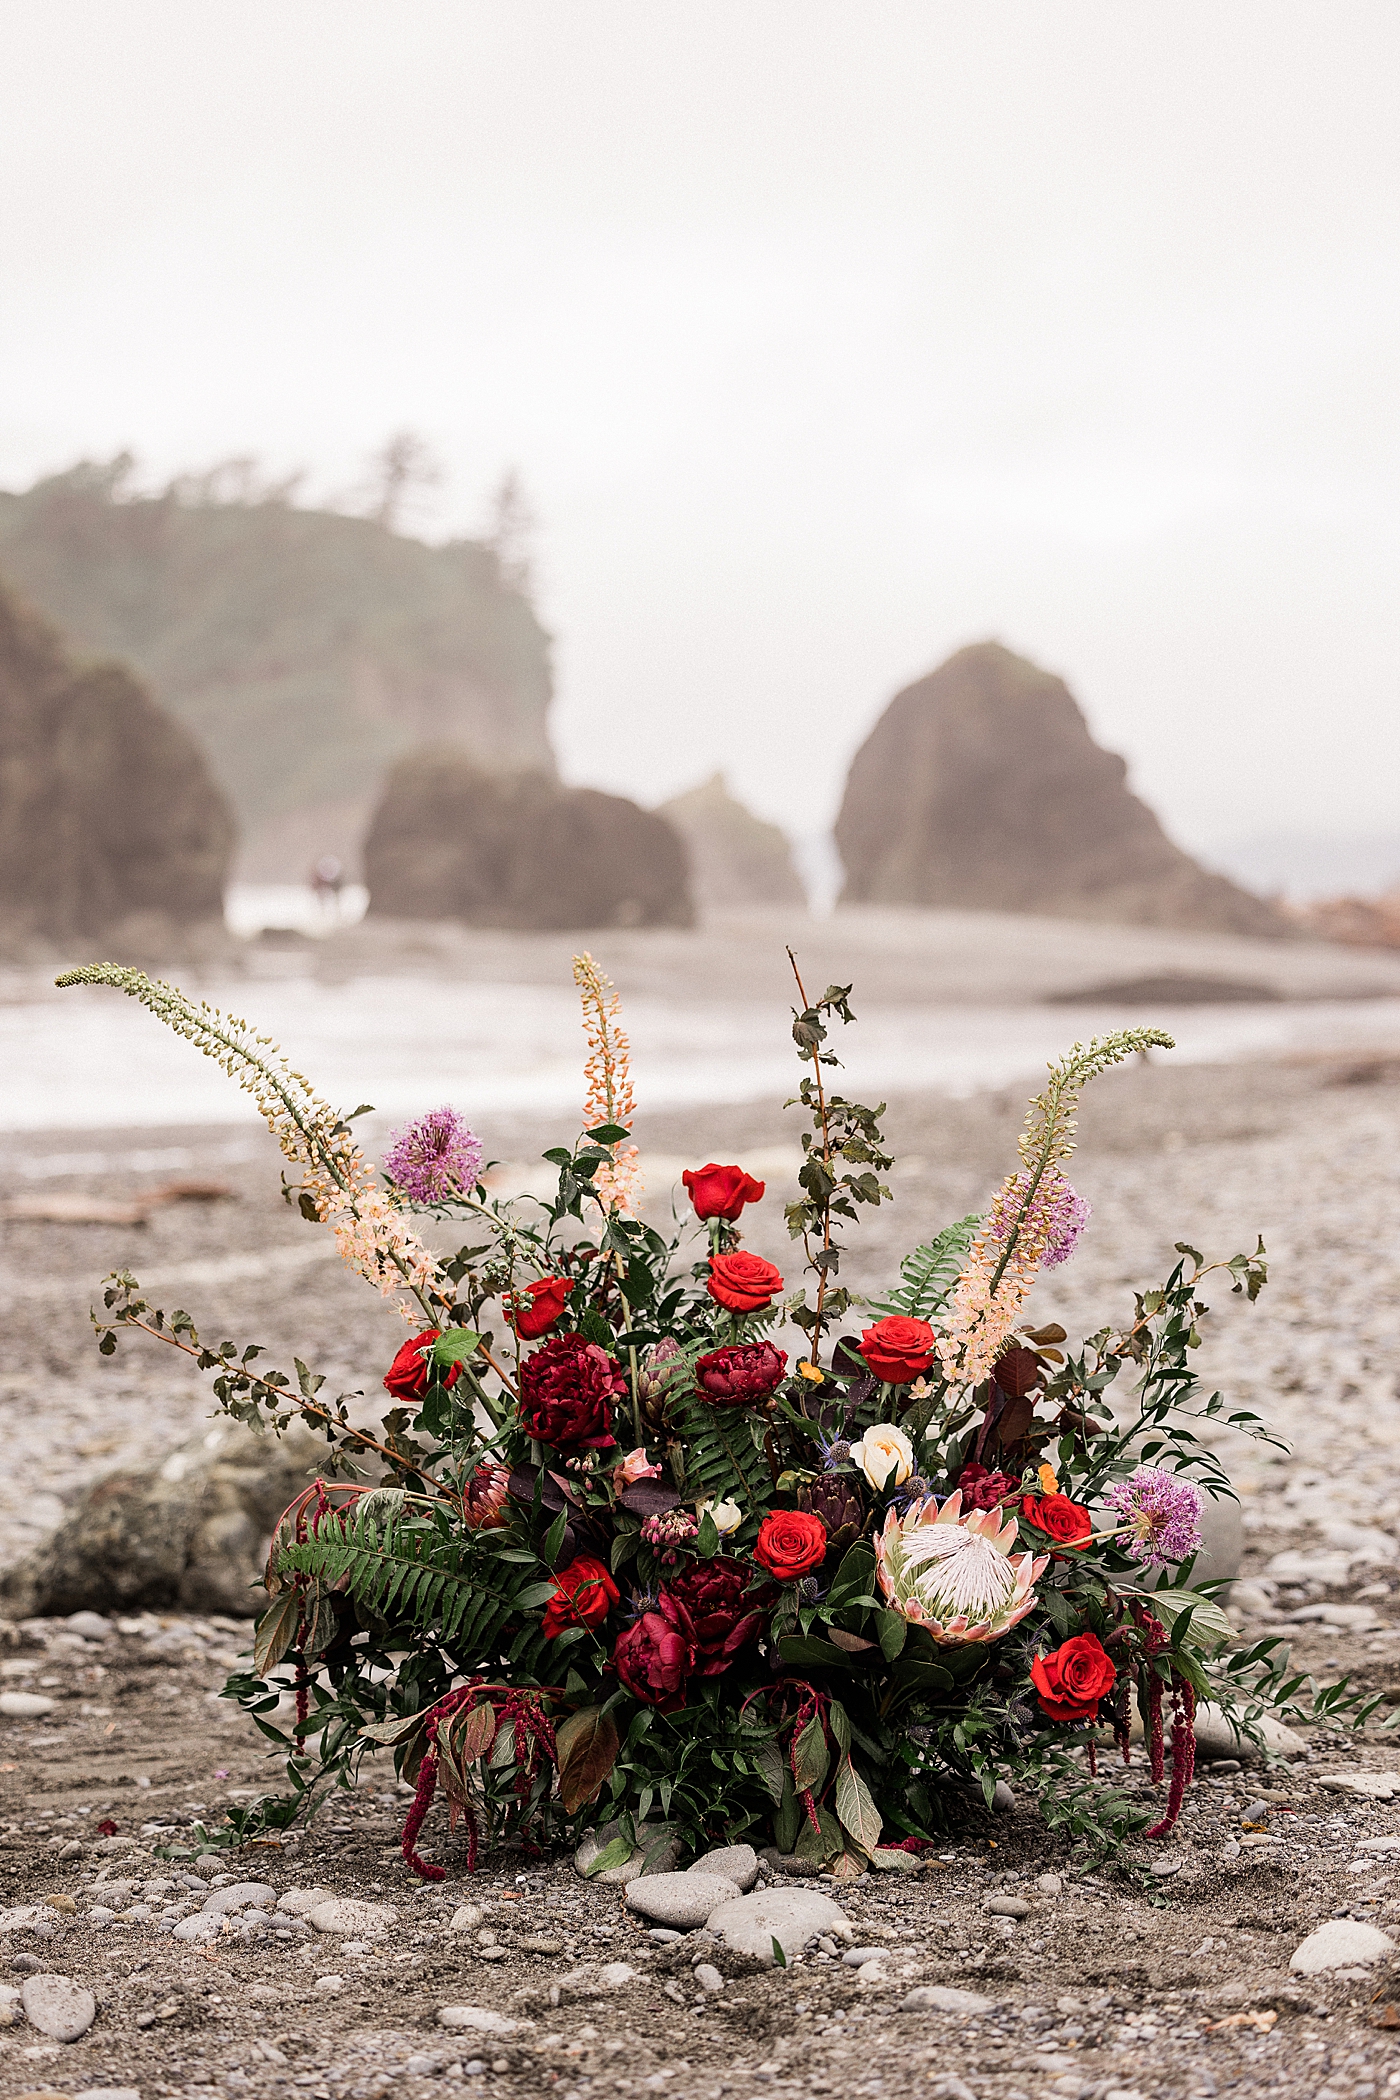 Ceremony site at Ruby Beach | Photo by Megan Montalvo Photography.